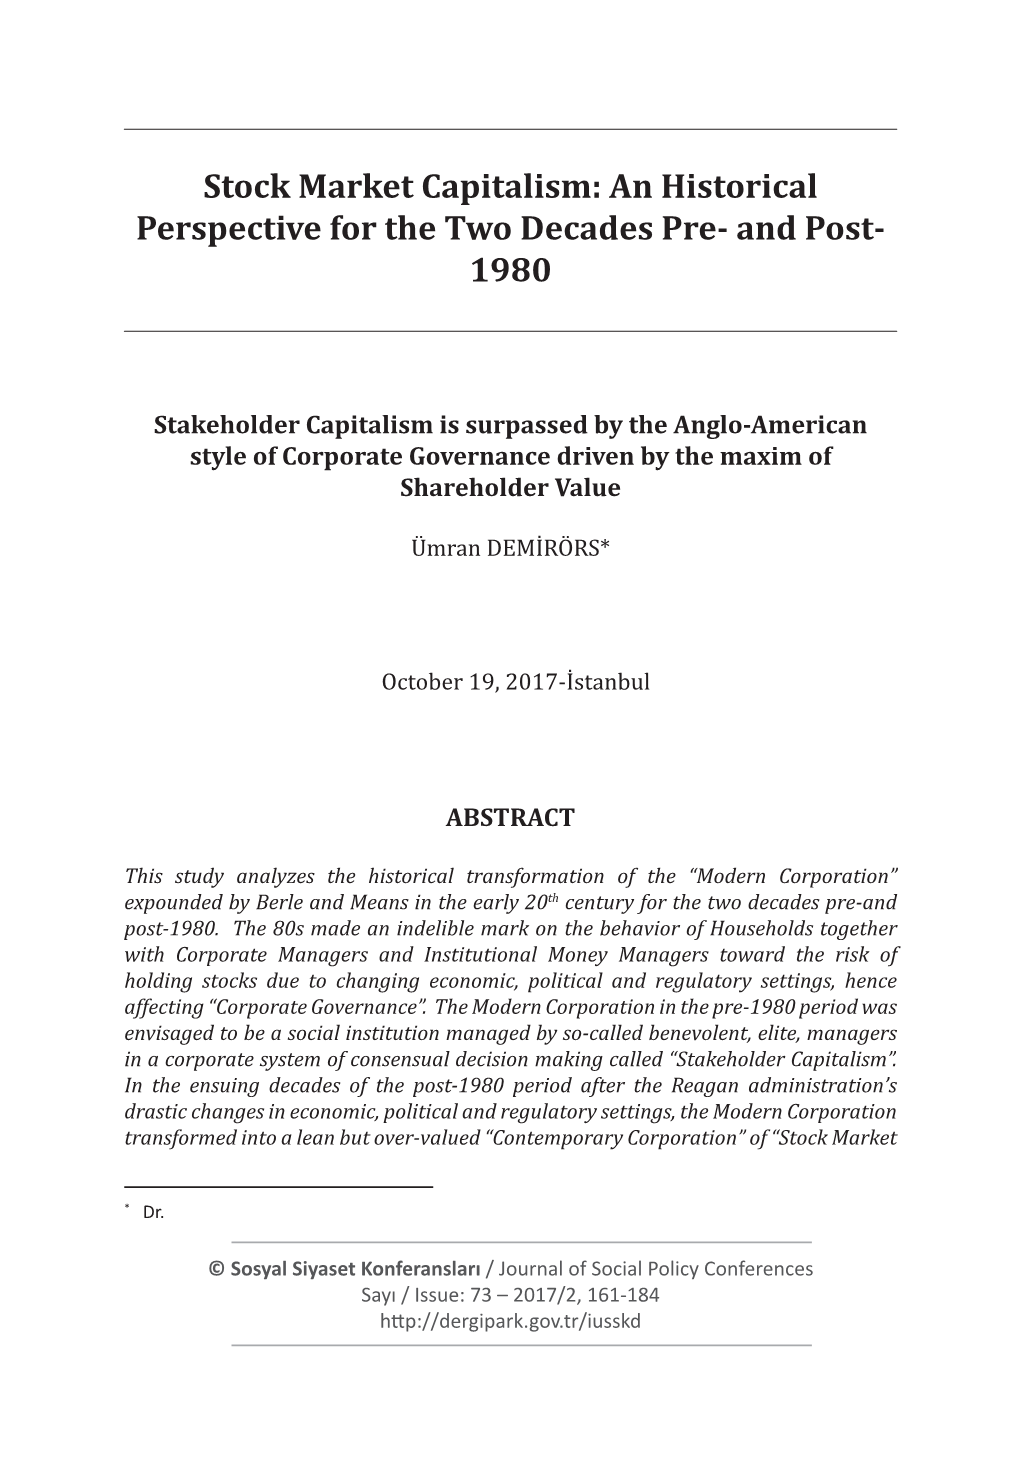 Stock Market Capitalism: an Historical Perspective for the Two Decades Pre- and Post- 1980